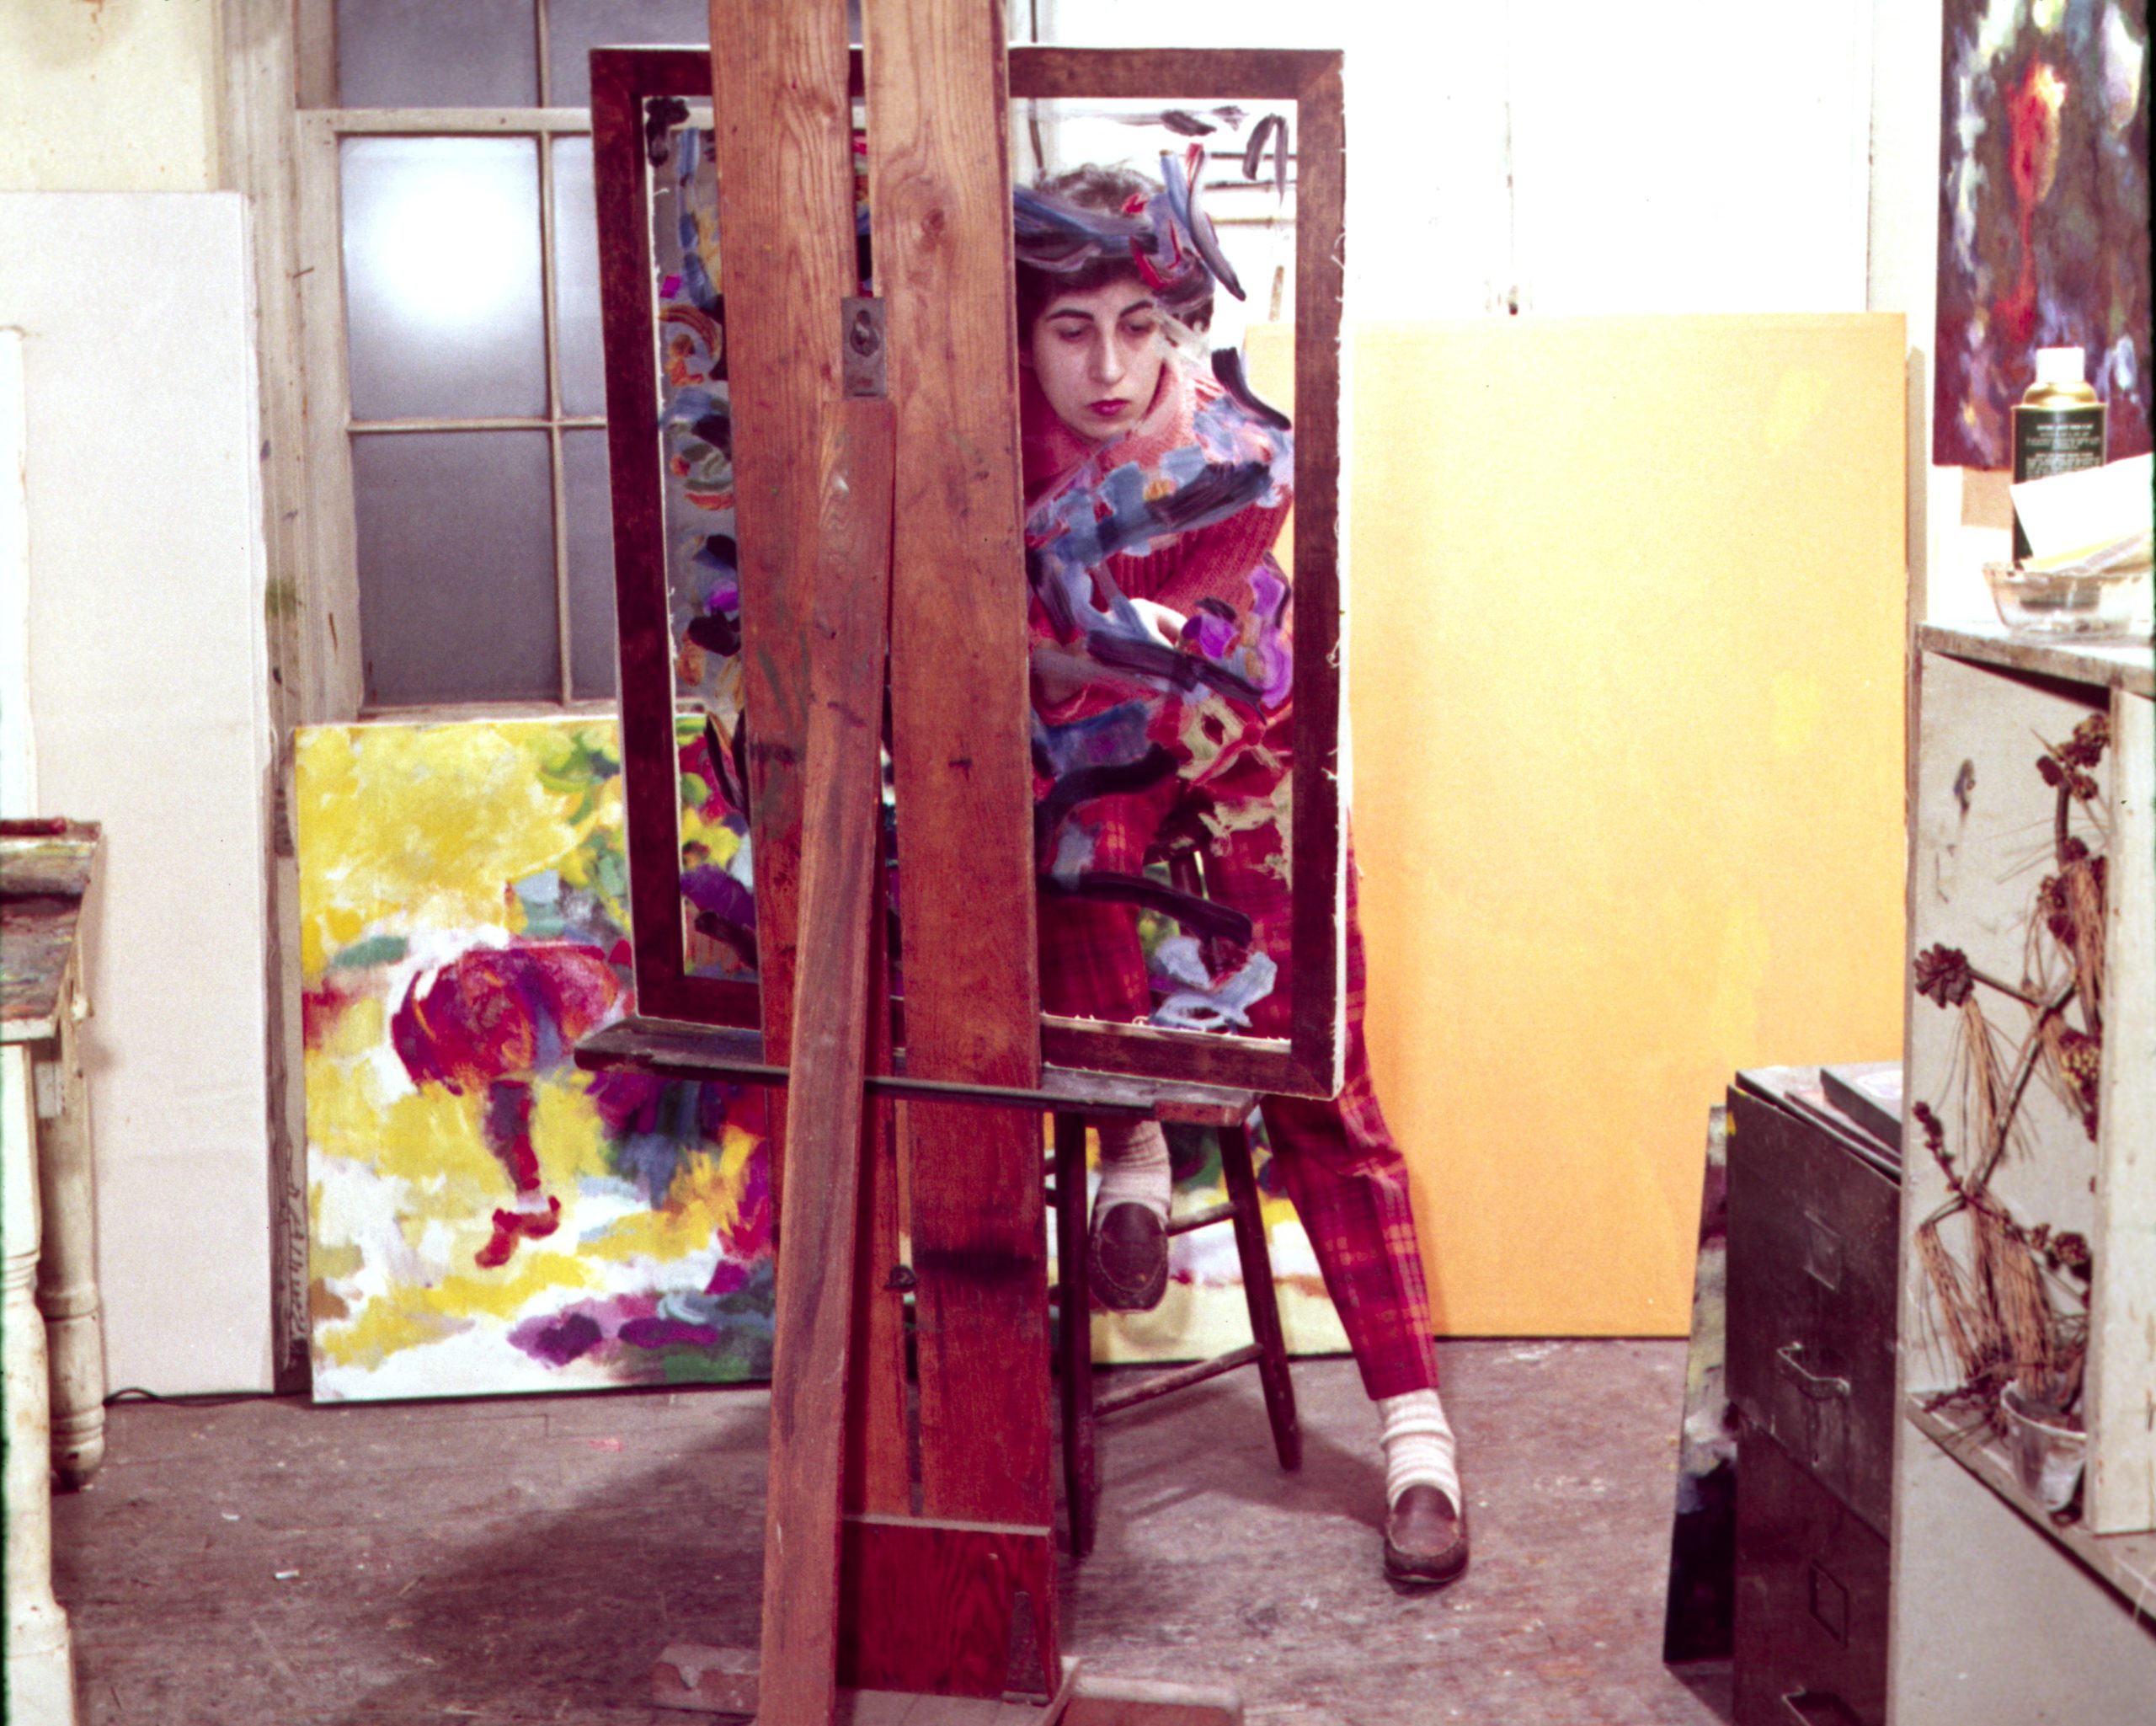 A picture of a woman in an art studio posing in an empty frame, wearing a colorful outfit. 